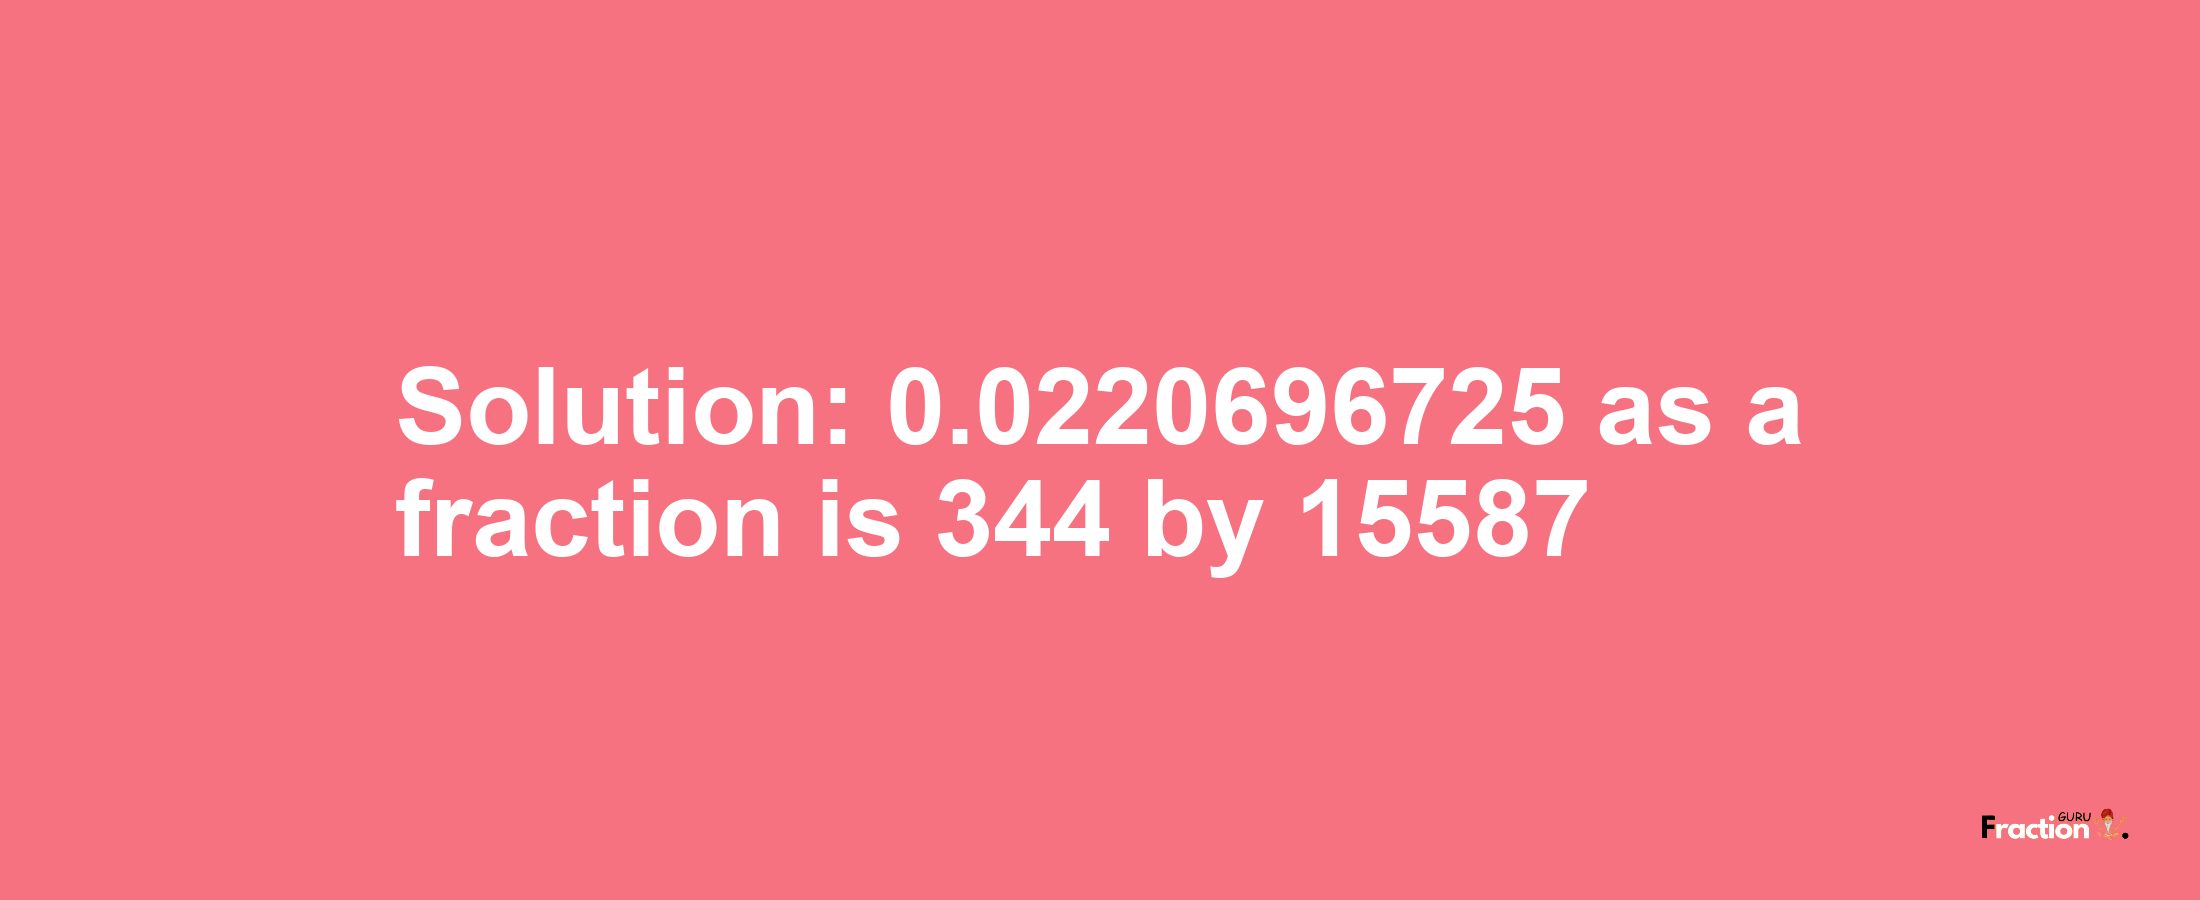 Solution:0.0220696725 as a fraction is 344/15587